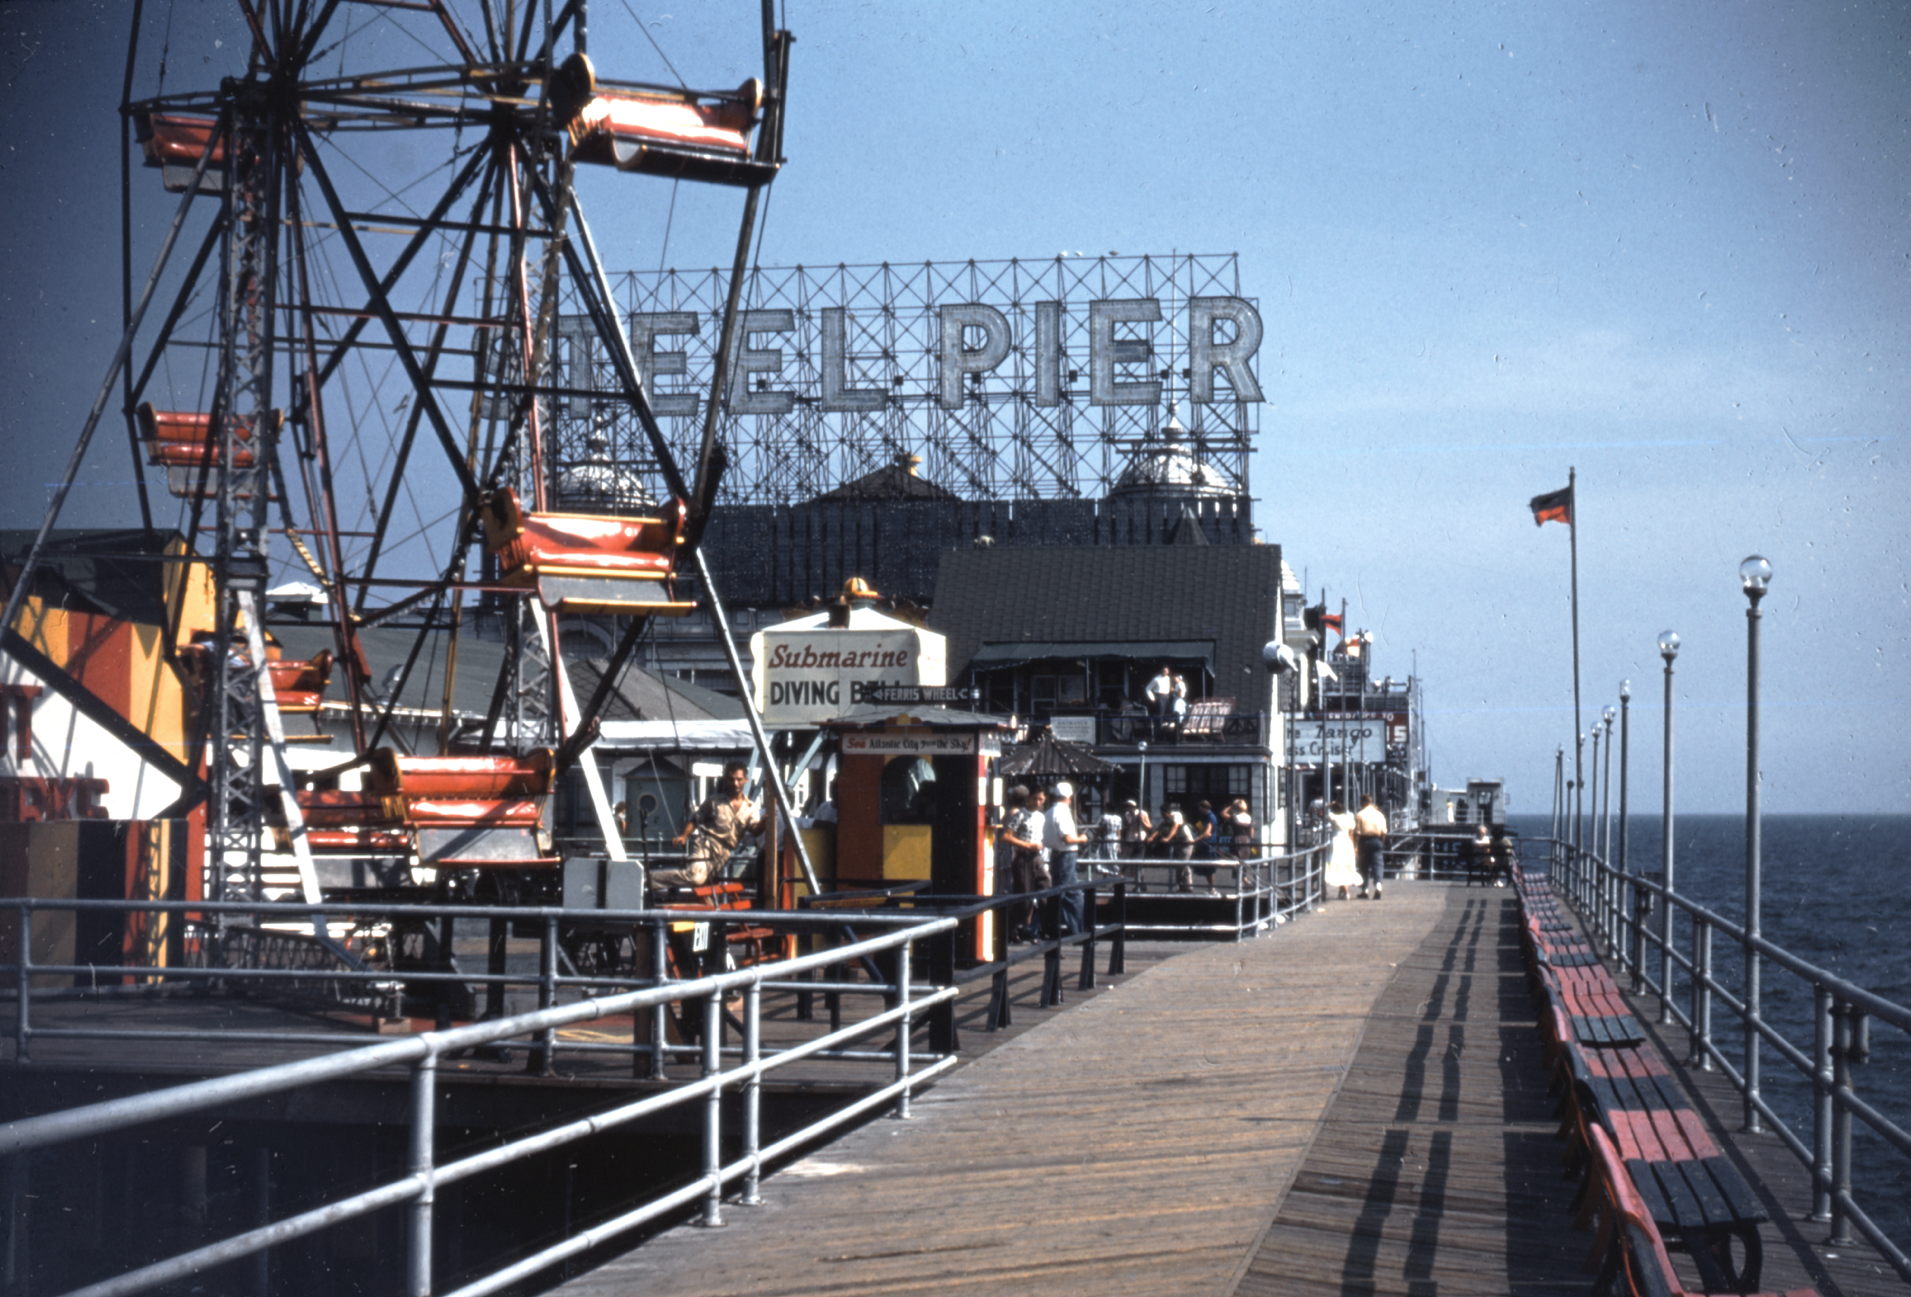 The Steel Pier, Atlantic City. Another in the set of found Kodachrome slides. View full size.